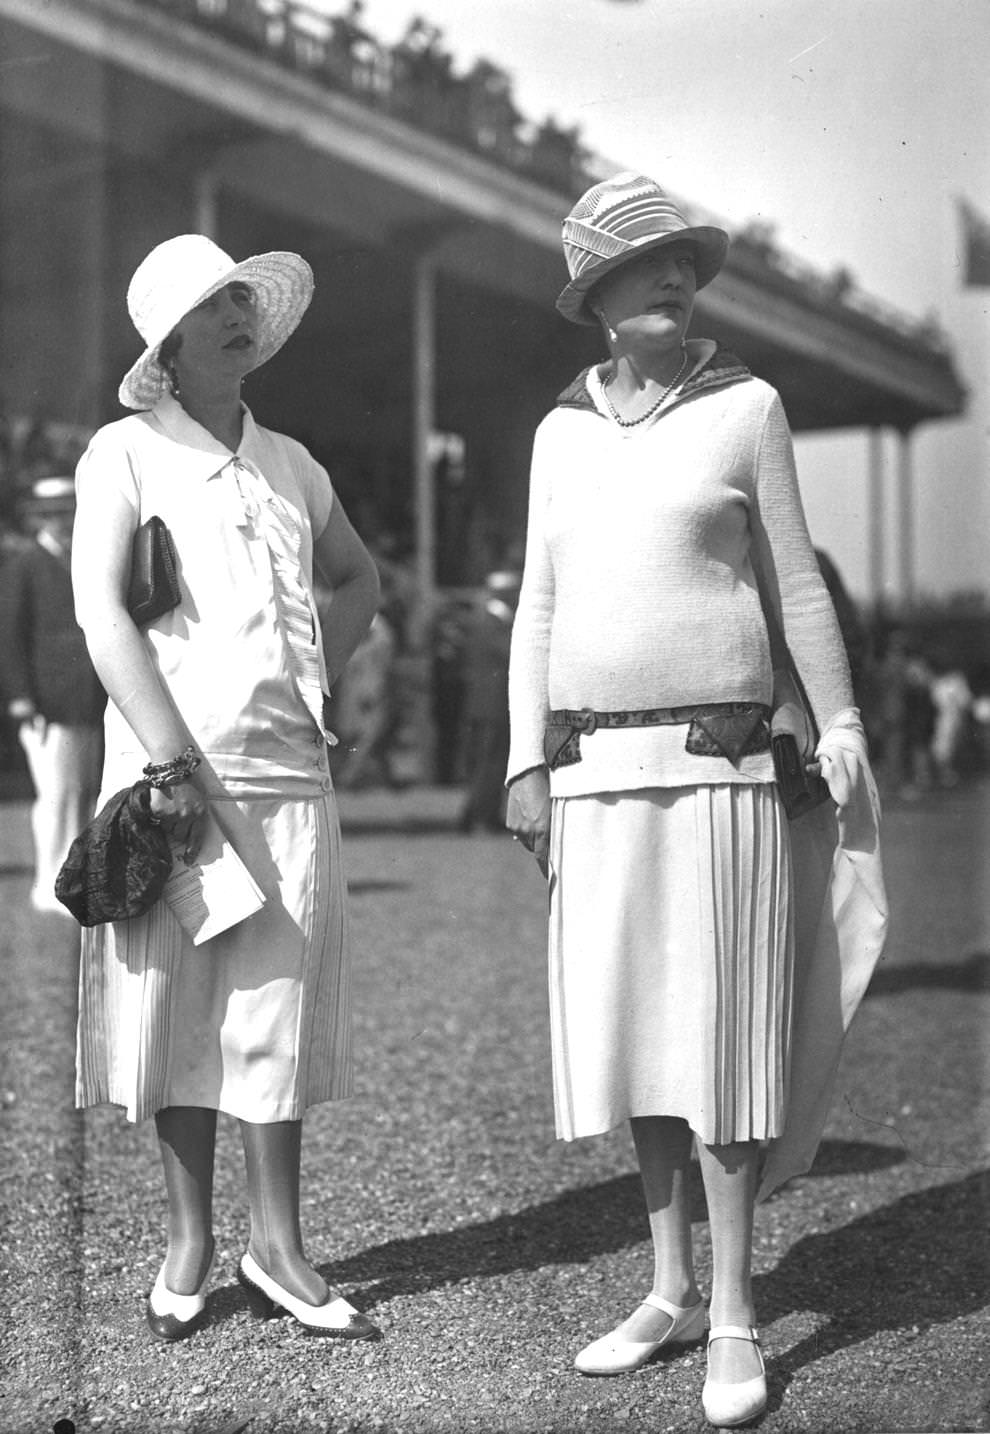 Two models wearing fashionable white outfits and cloche hats, inspired by sports designs during a day at the races, 1925